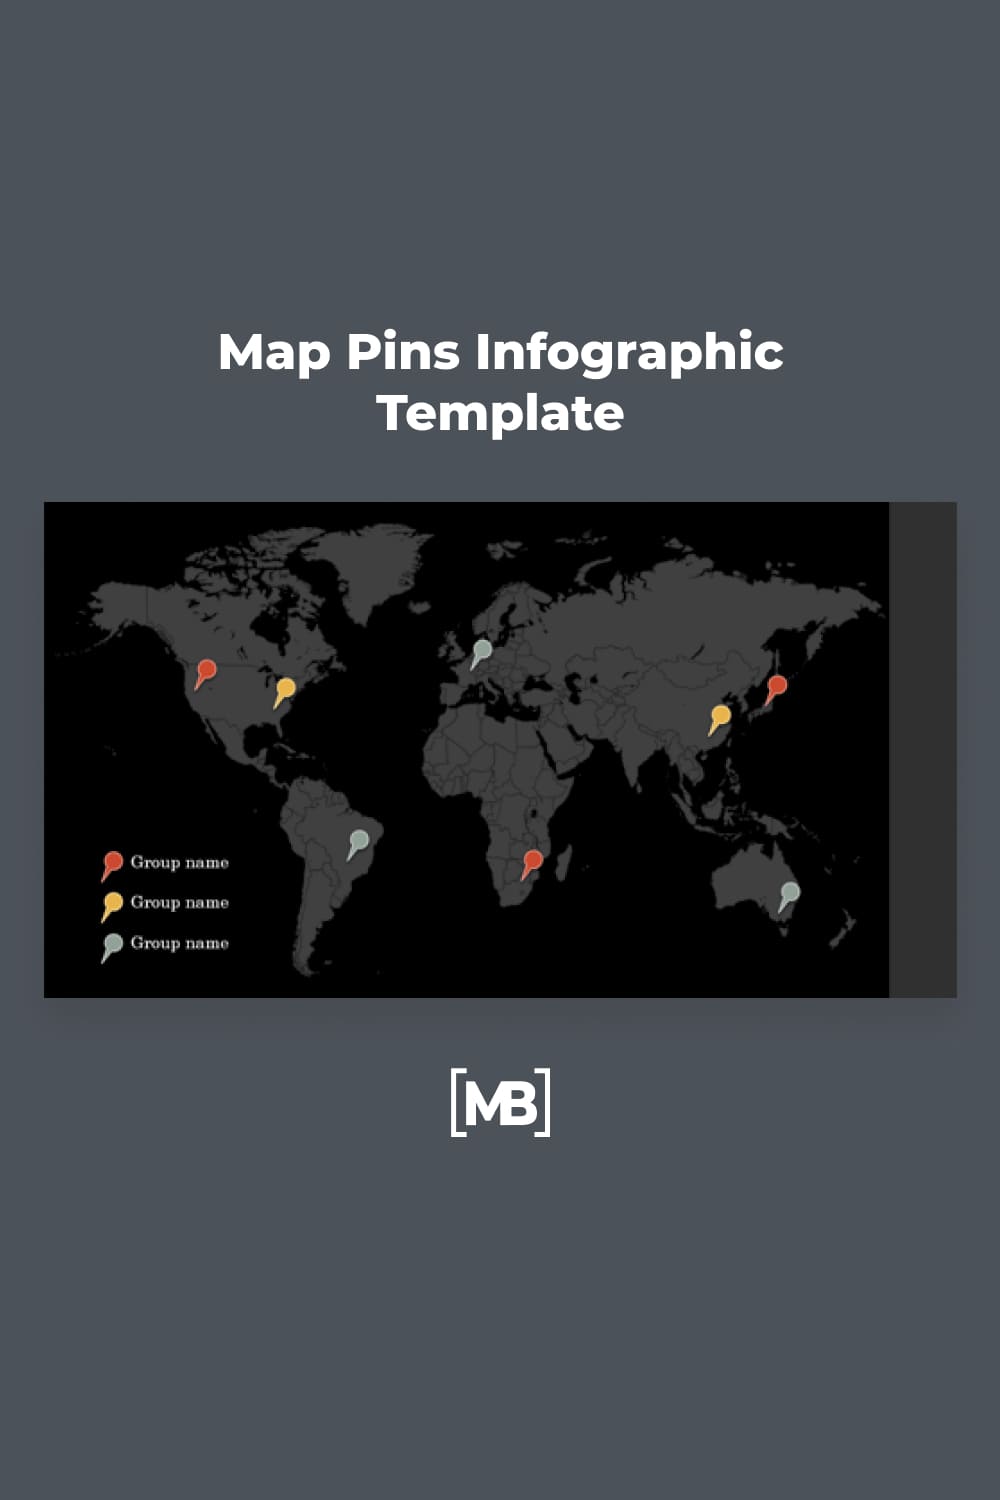 Map pins infographic template.